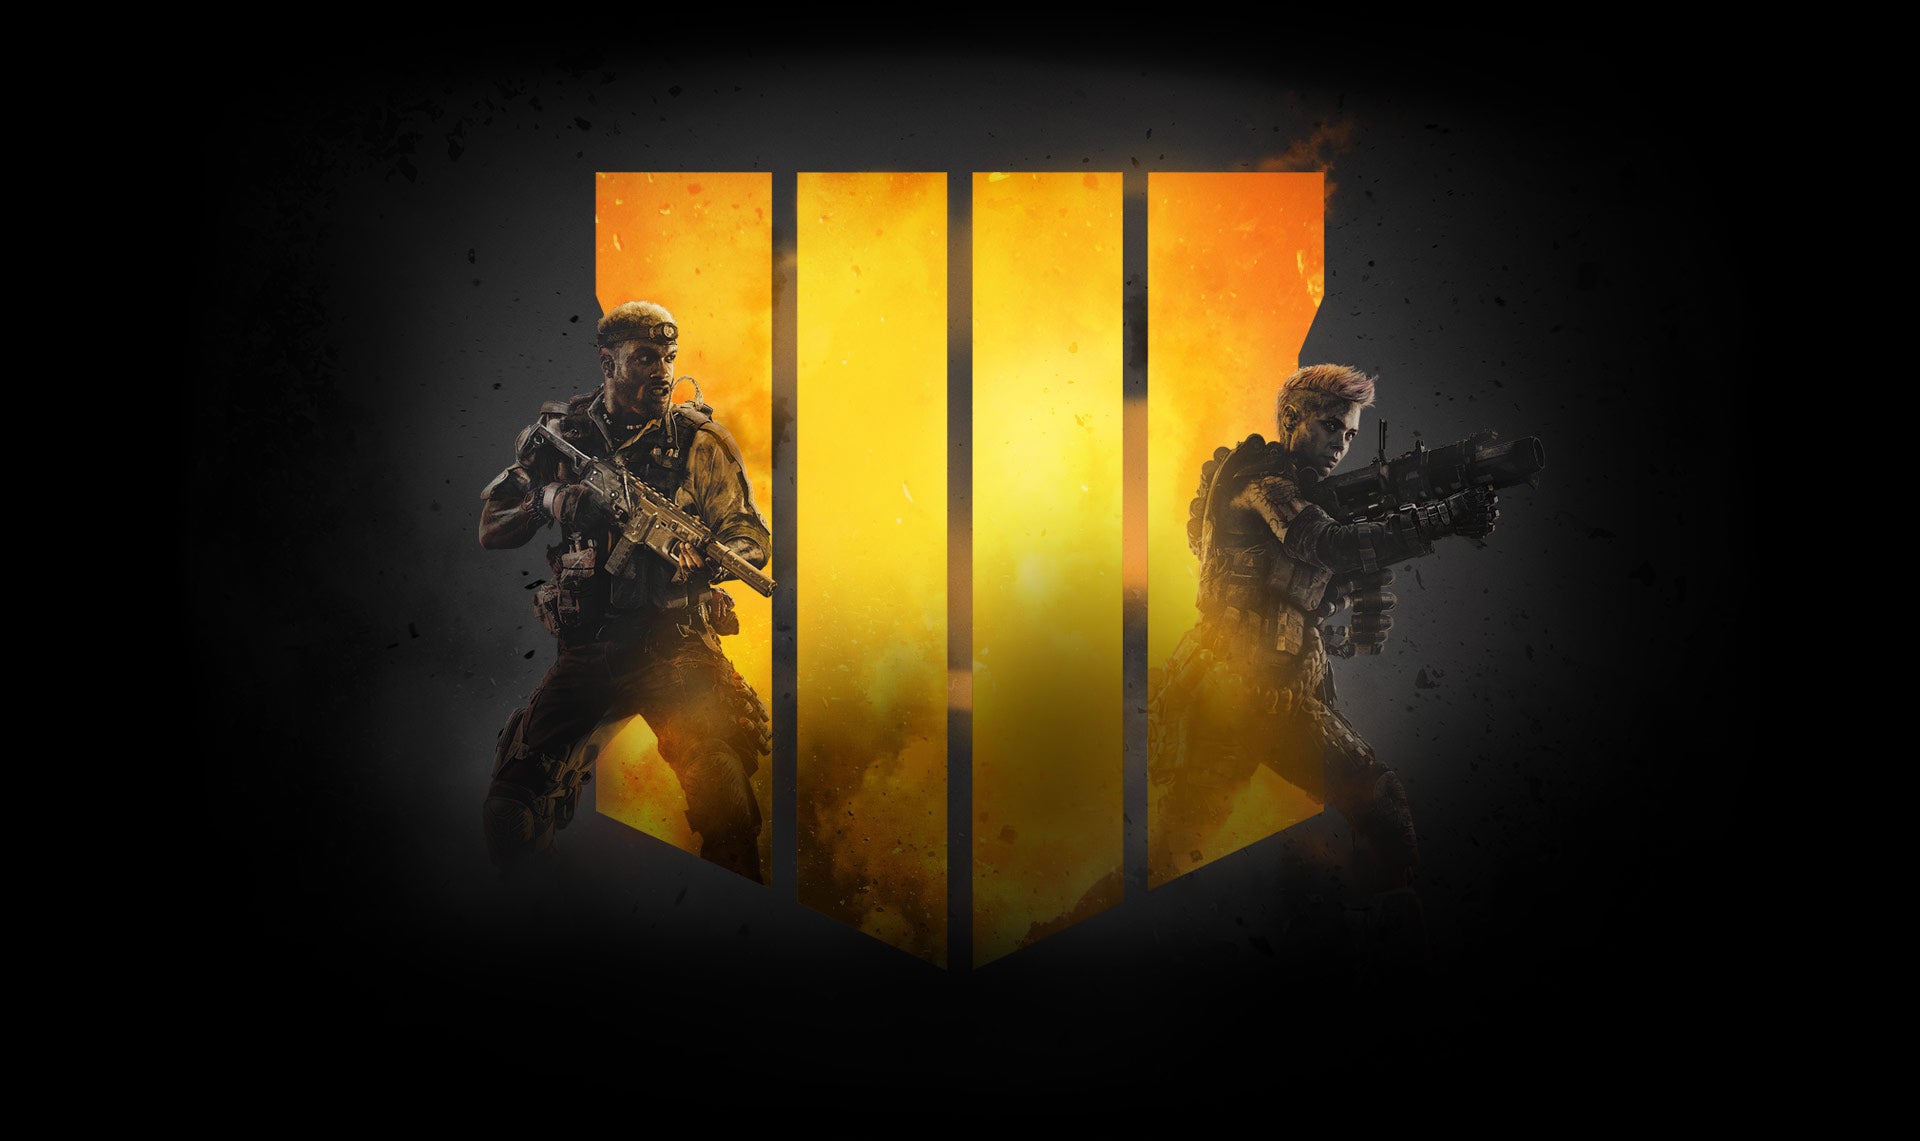 Image for Black Ops 4 Blackout closed beta gameplay showcases Call of Duty's battle royale mode